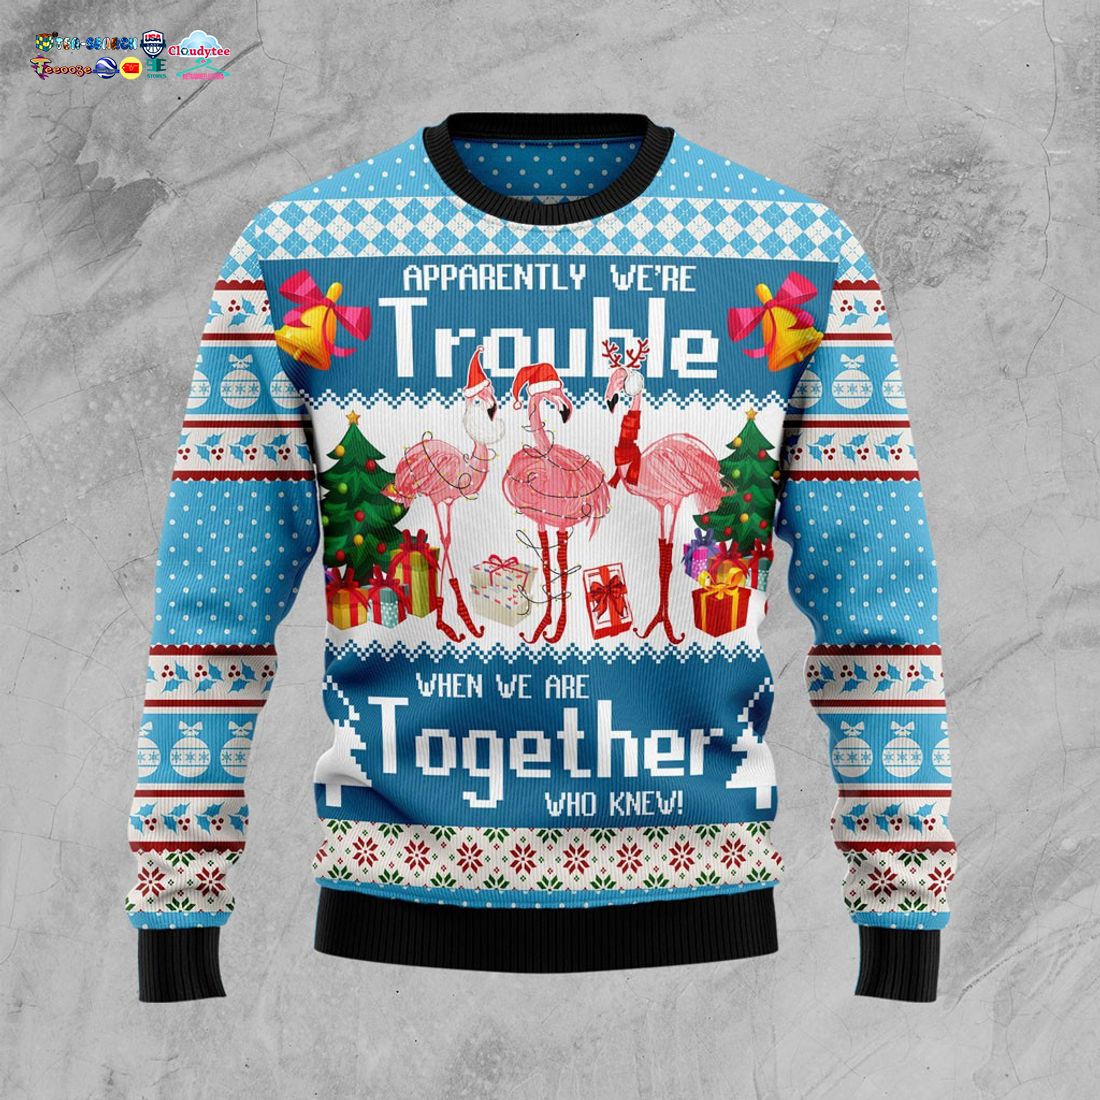 flamingo-apparently-were-trouble-when-we-are-together-who-knew-ugly-christmas-sweater-1-tis57.jpg